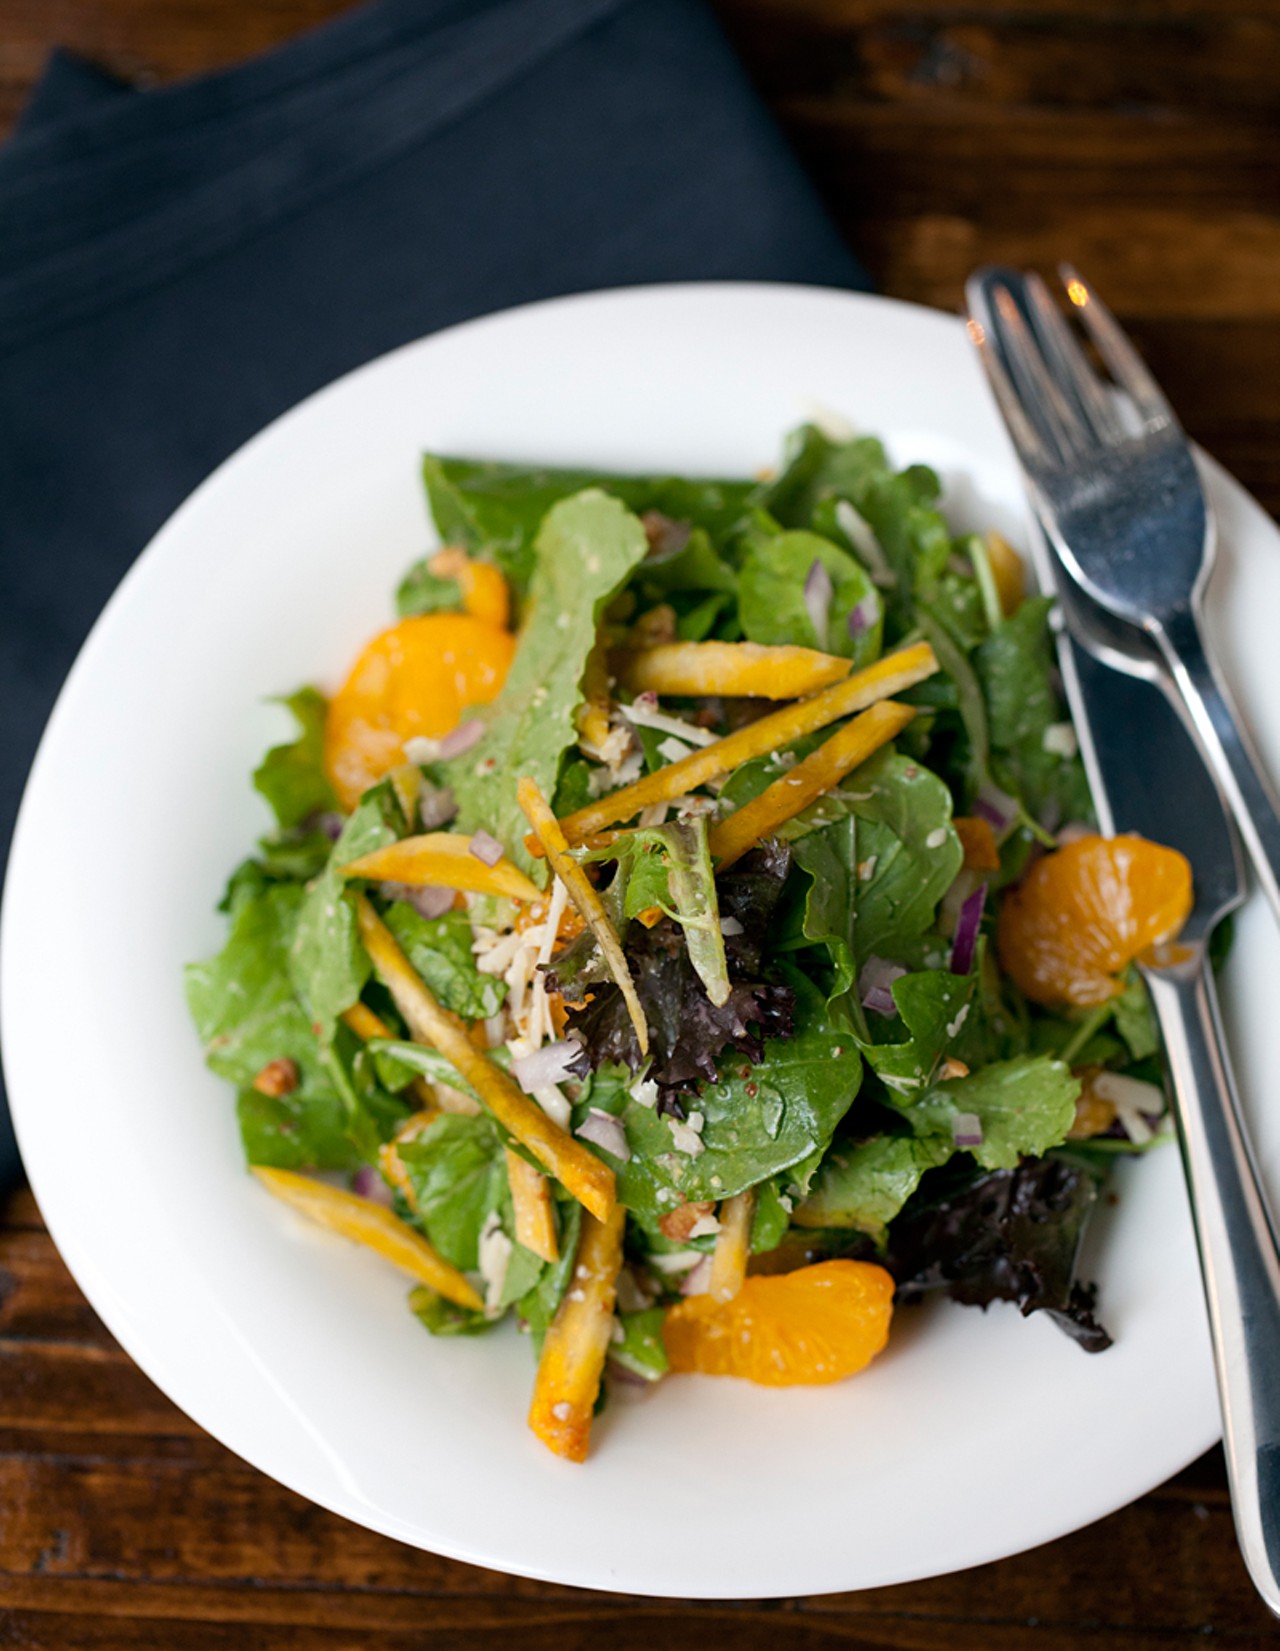 The "Beets Me!" salad is arugula, spring mix, toasted walnuts, mandarin oranges, golden beets, red onions and parmesan with a citrus viaigrette.